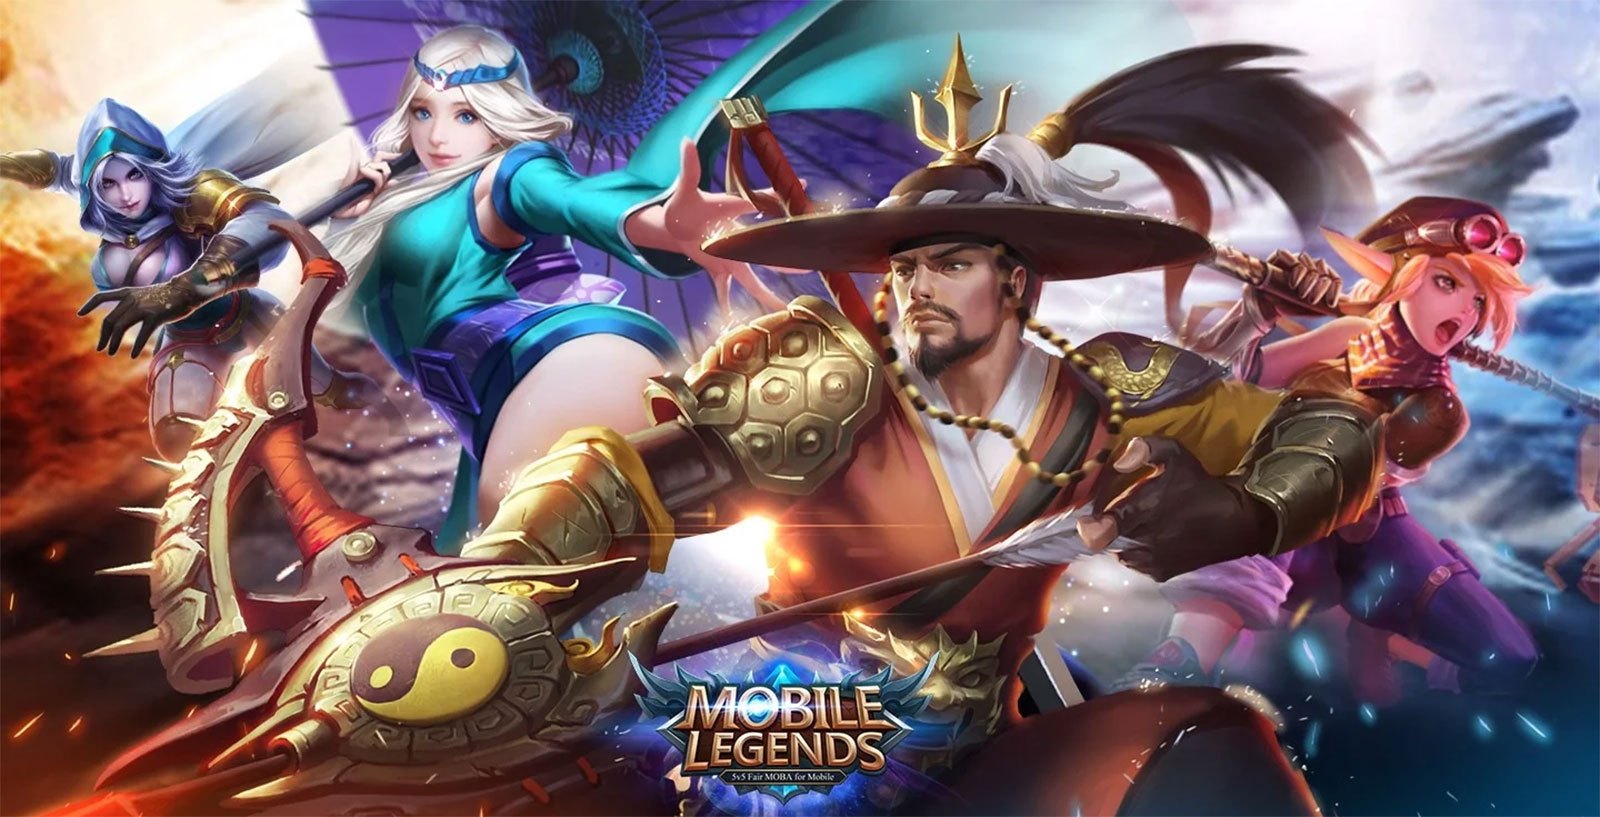 Discover How to Get Free Skins on Mobile Legends